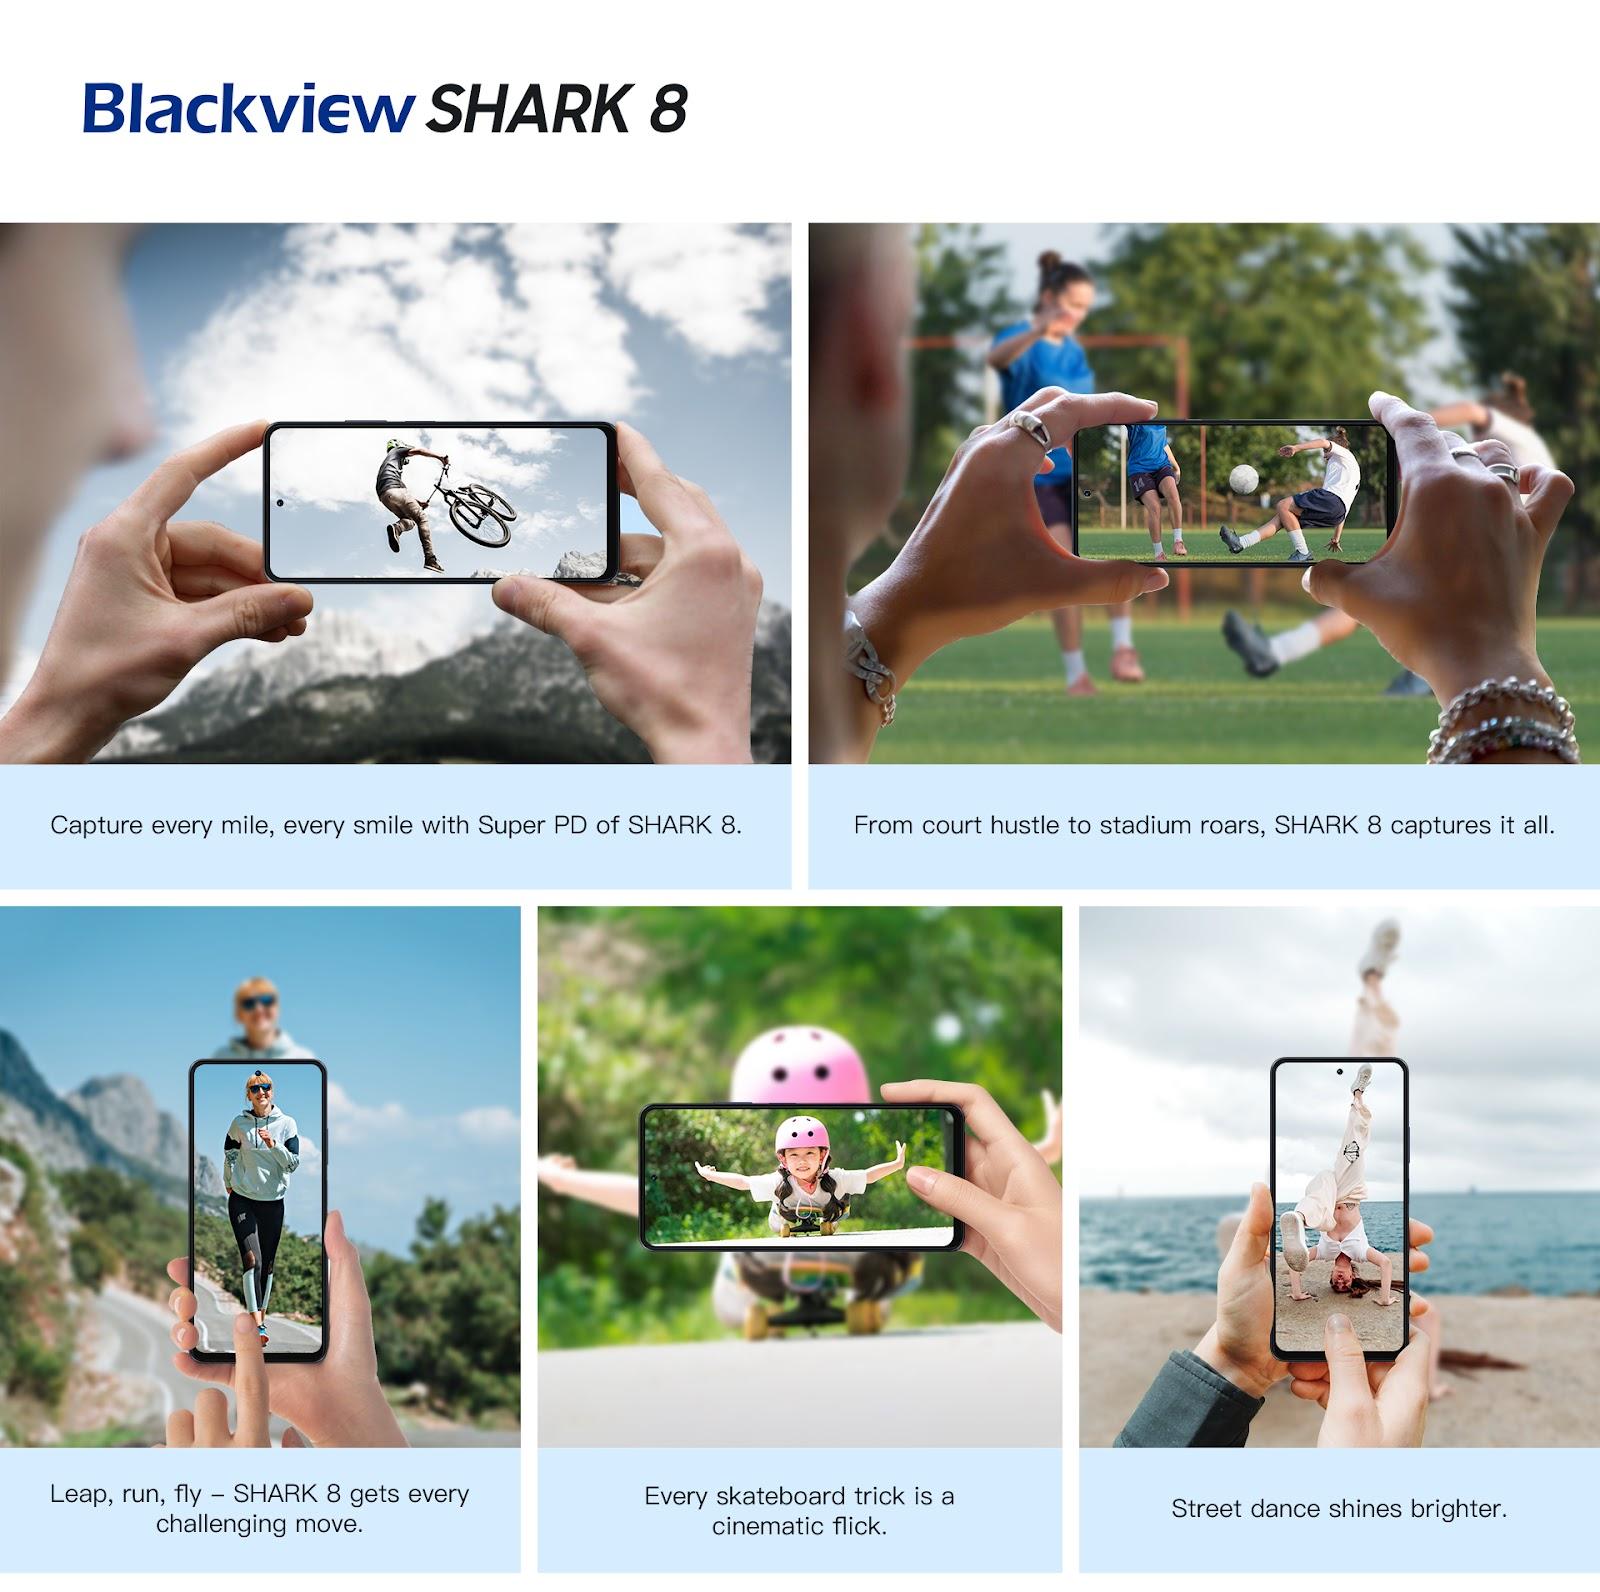 SHARK 8 allows users to capture decisive moments in any condition